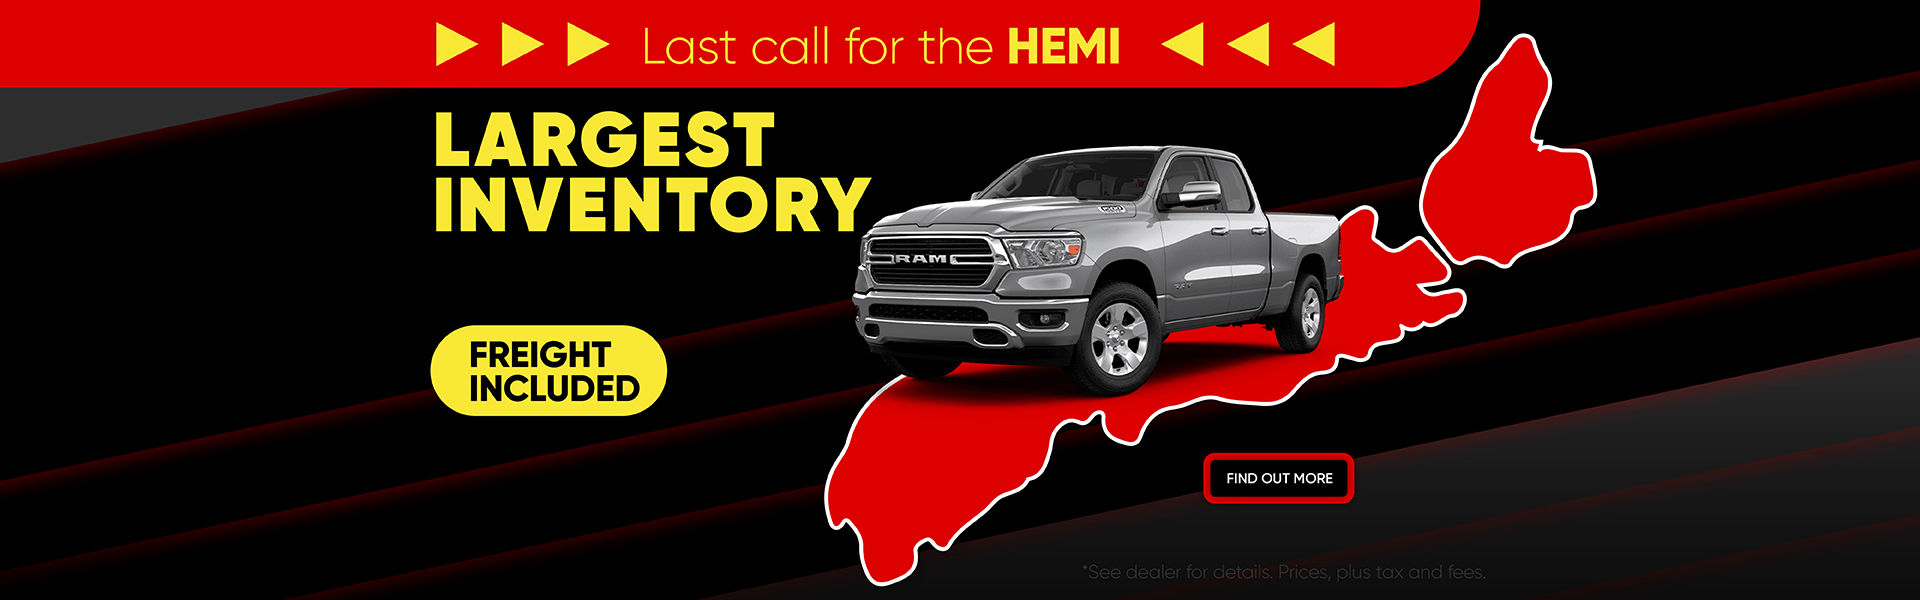 We have the Largest Inventory of New Hemi Rams in Nova Scotia